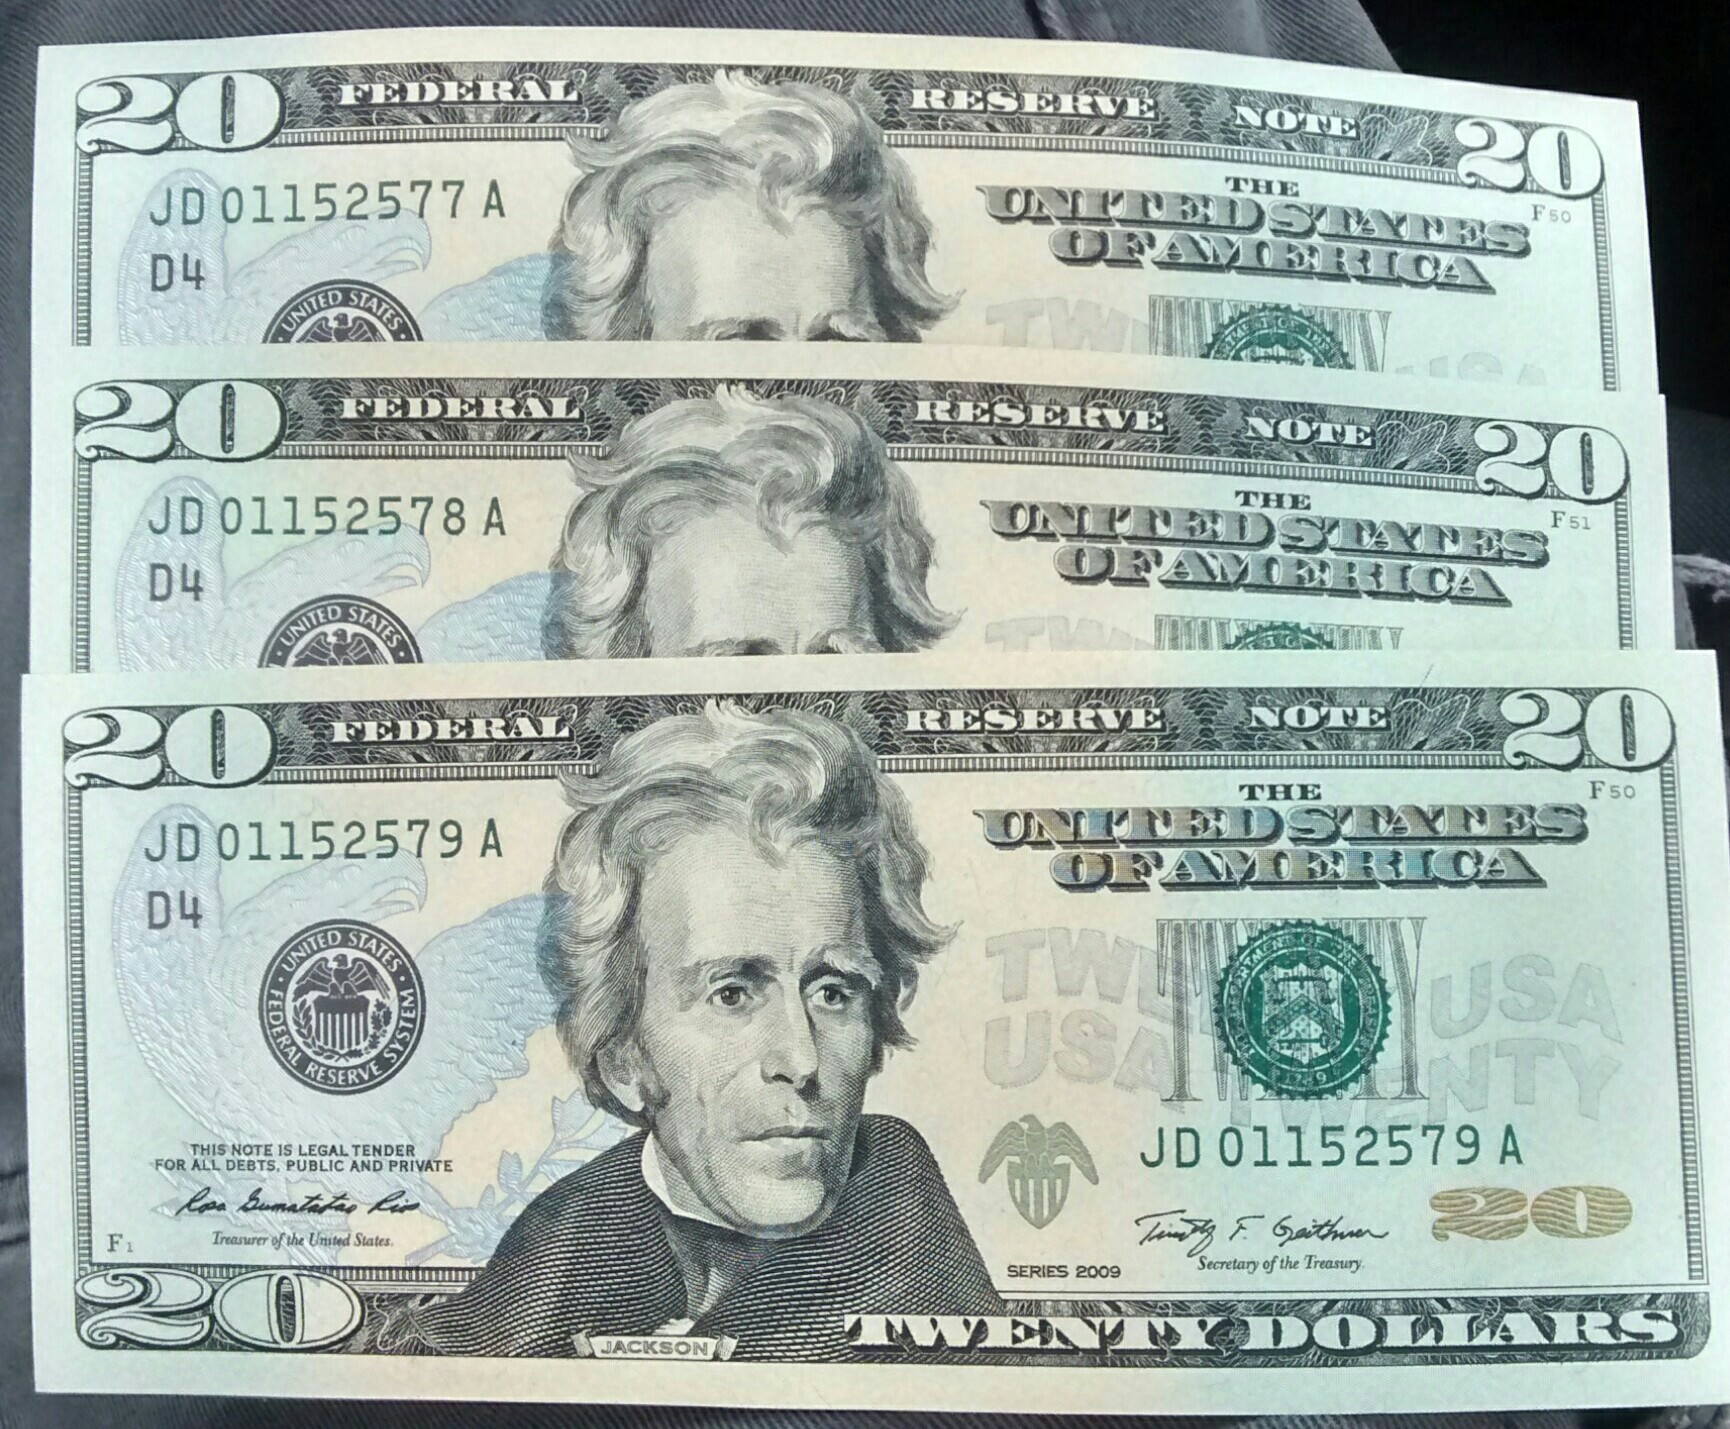 I received 3 uncirculated sequential serial $20 bills from the ATM ...